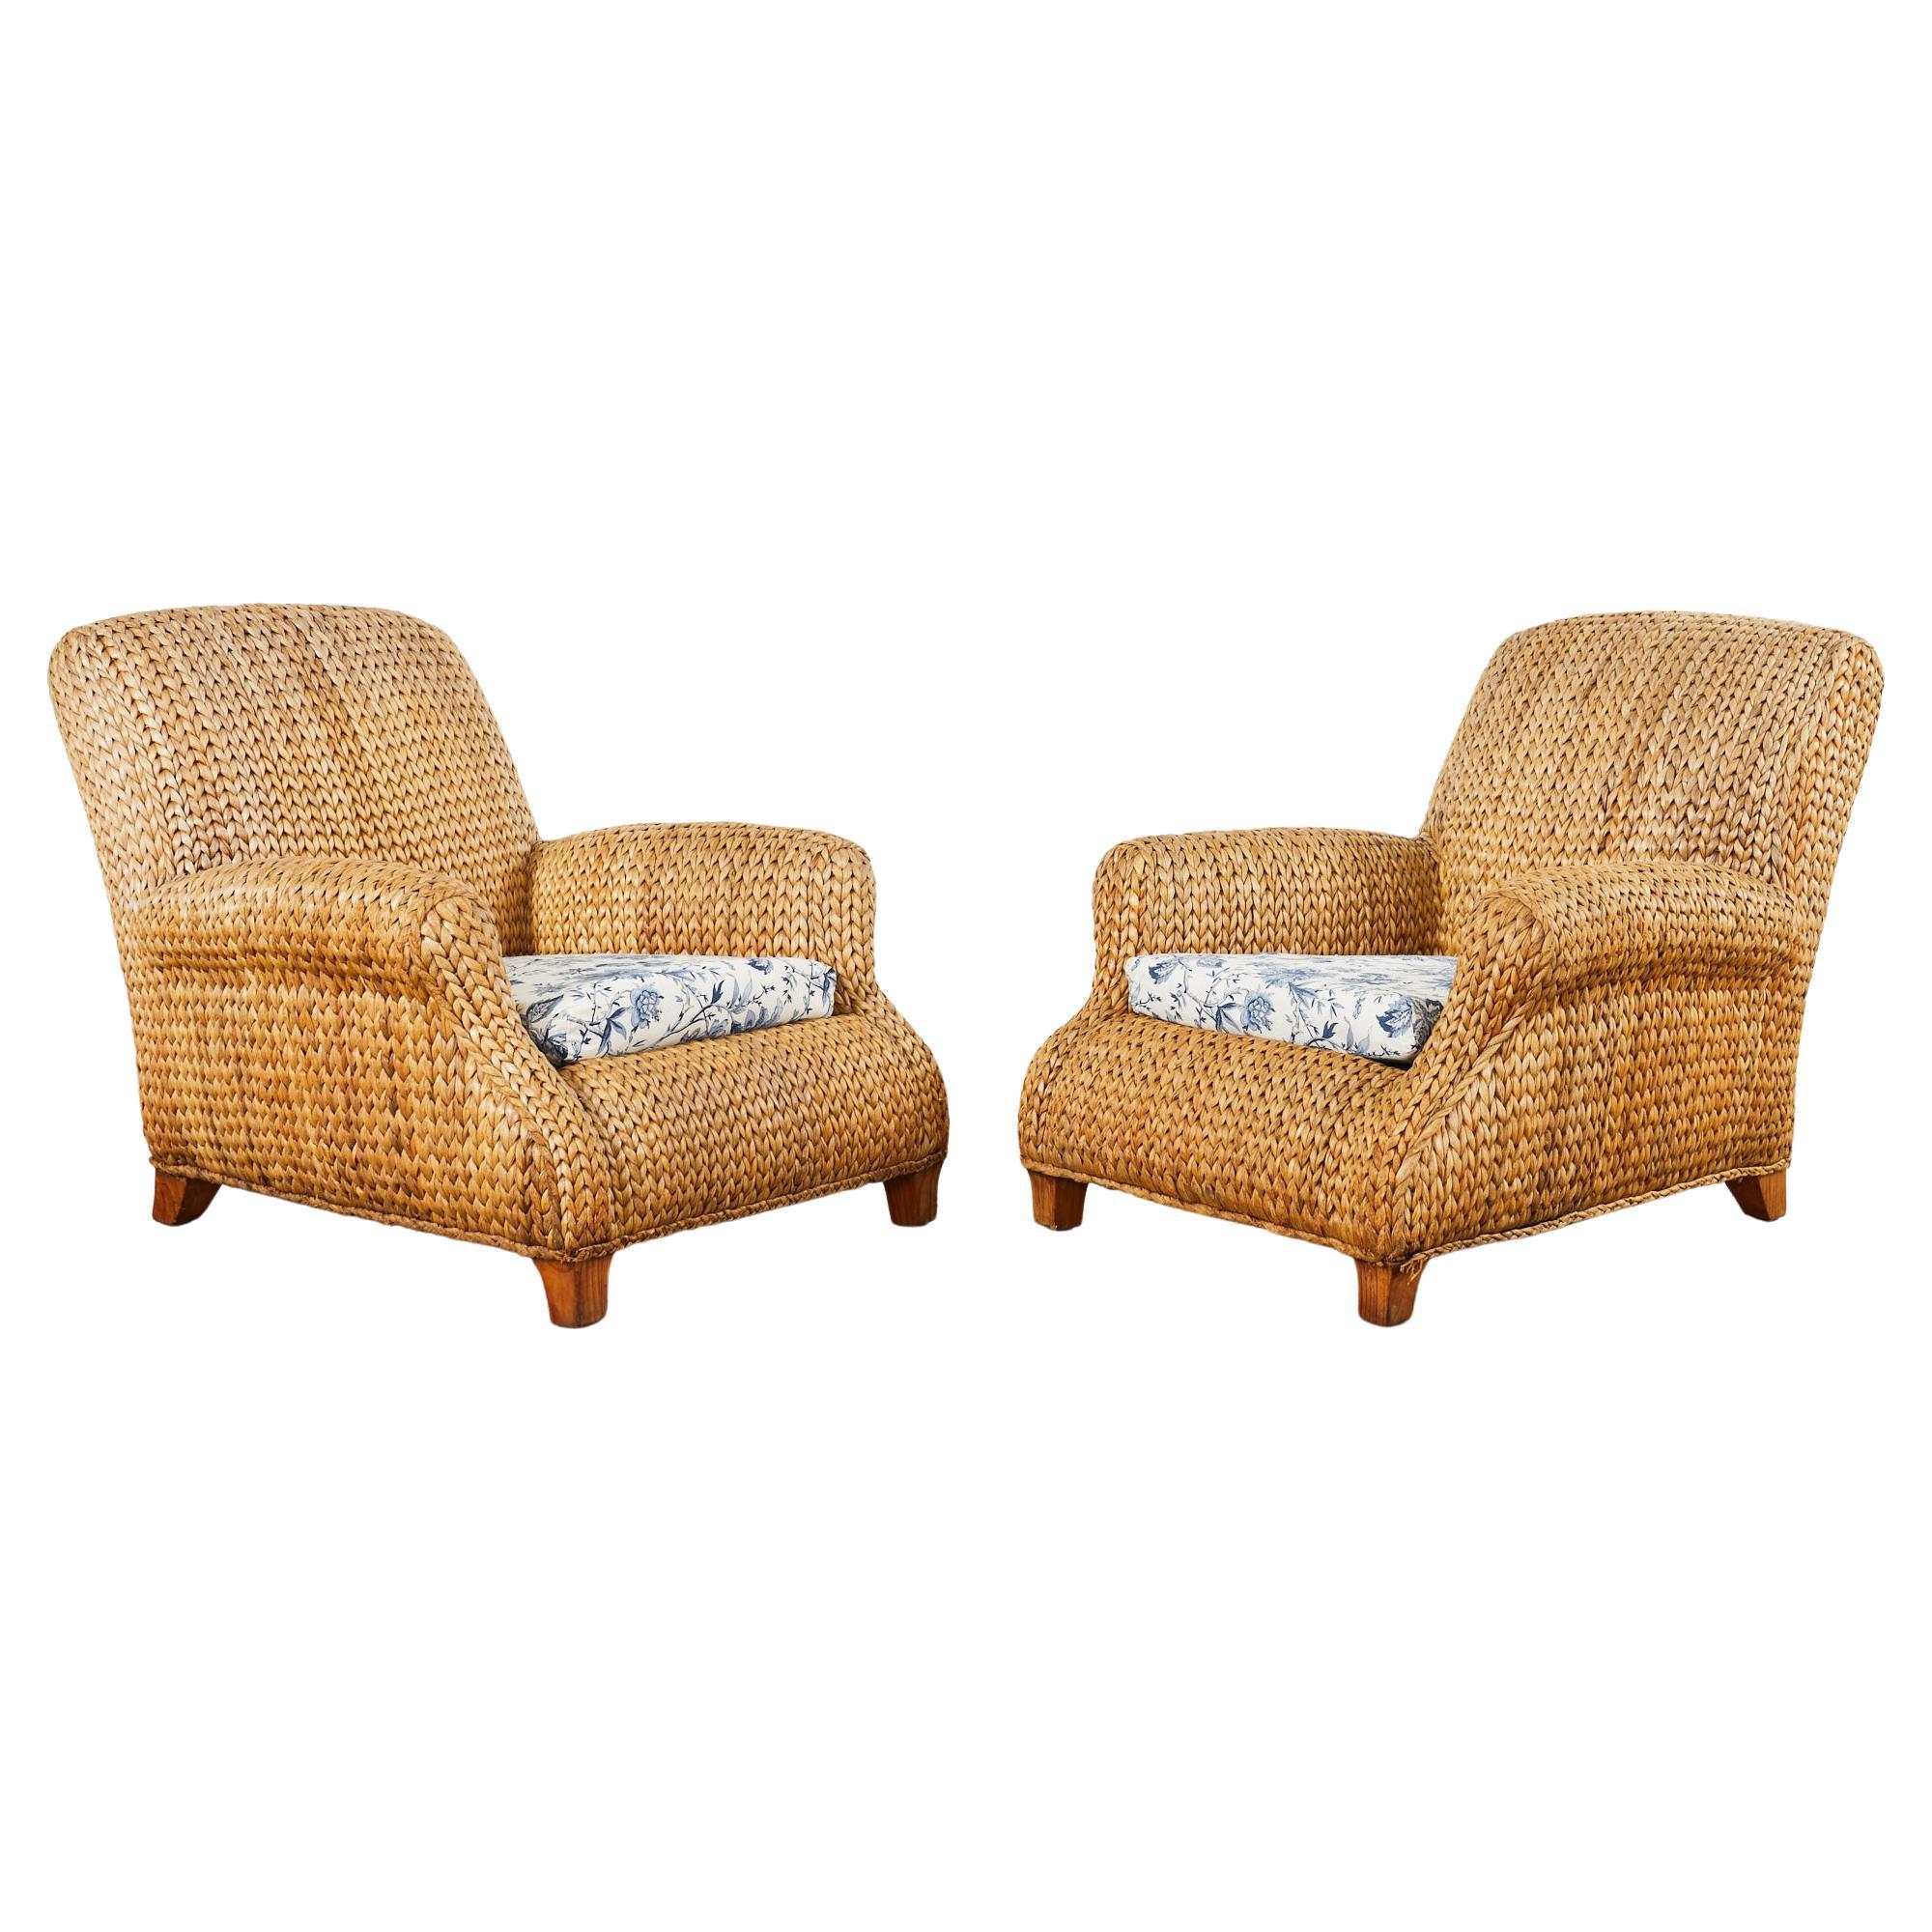 Pair of Ralph Lauren Organic Modern Seagrass Lounge Chairs For Sale